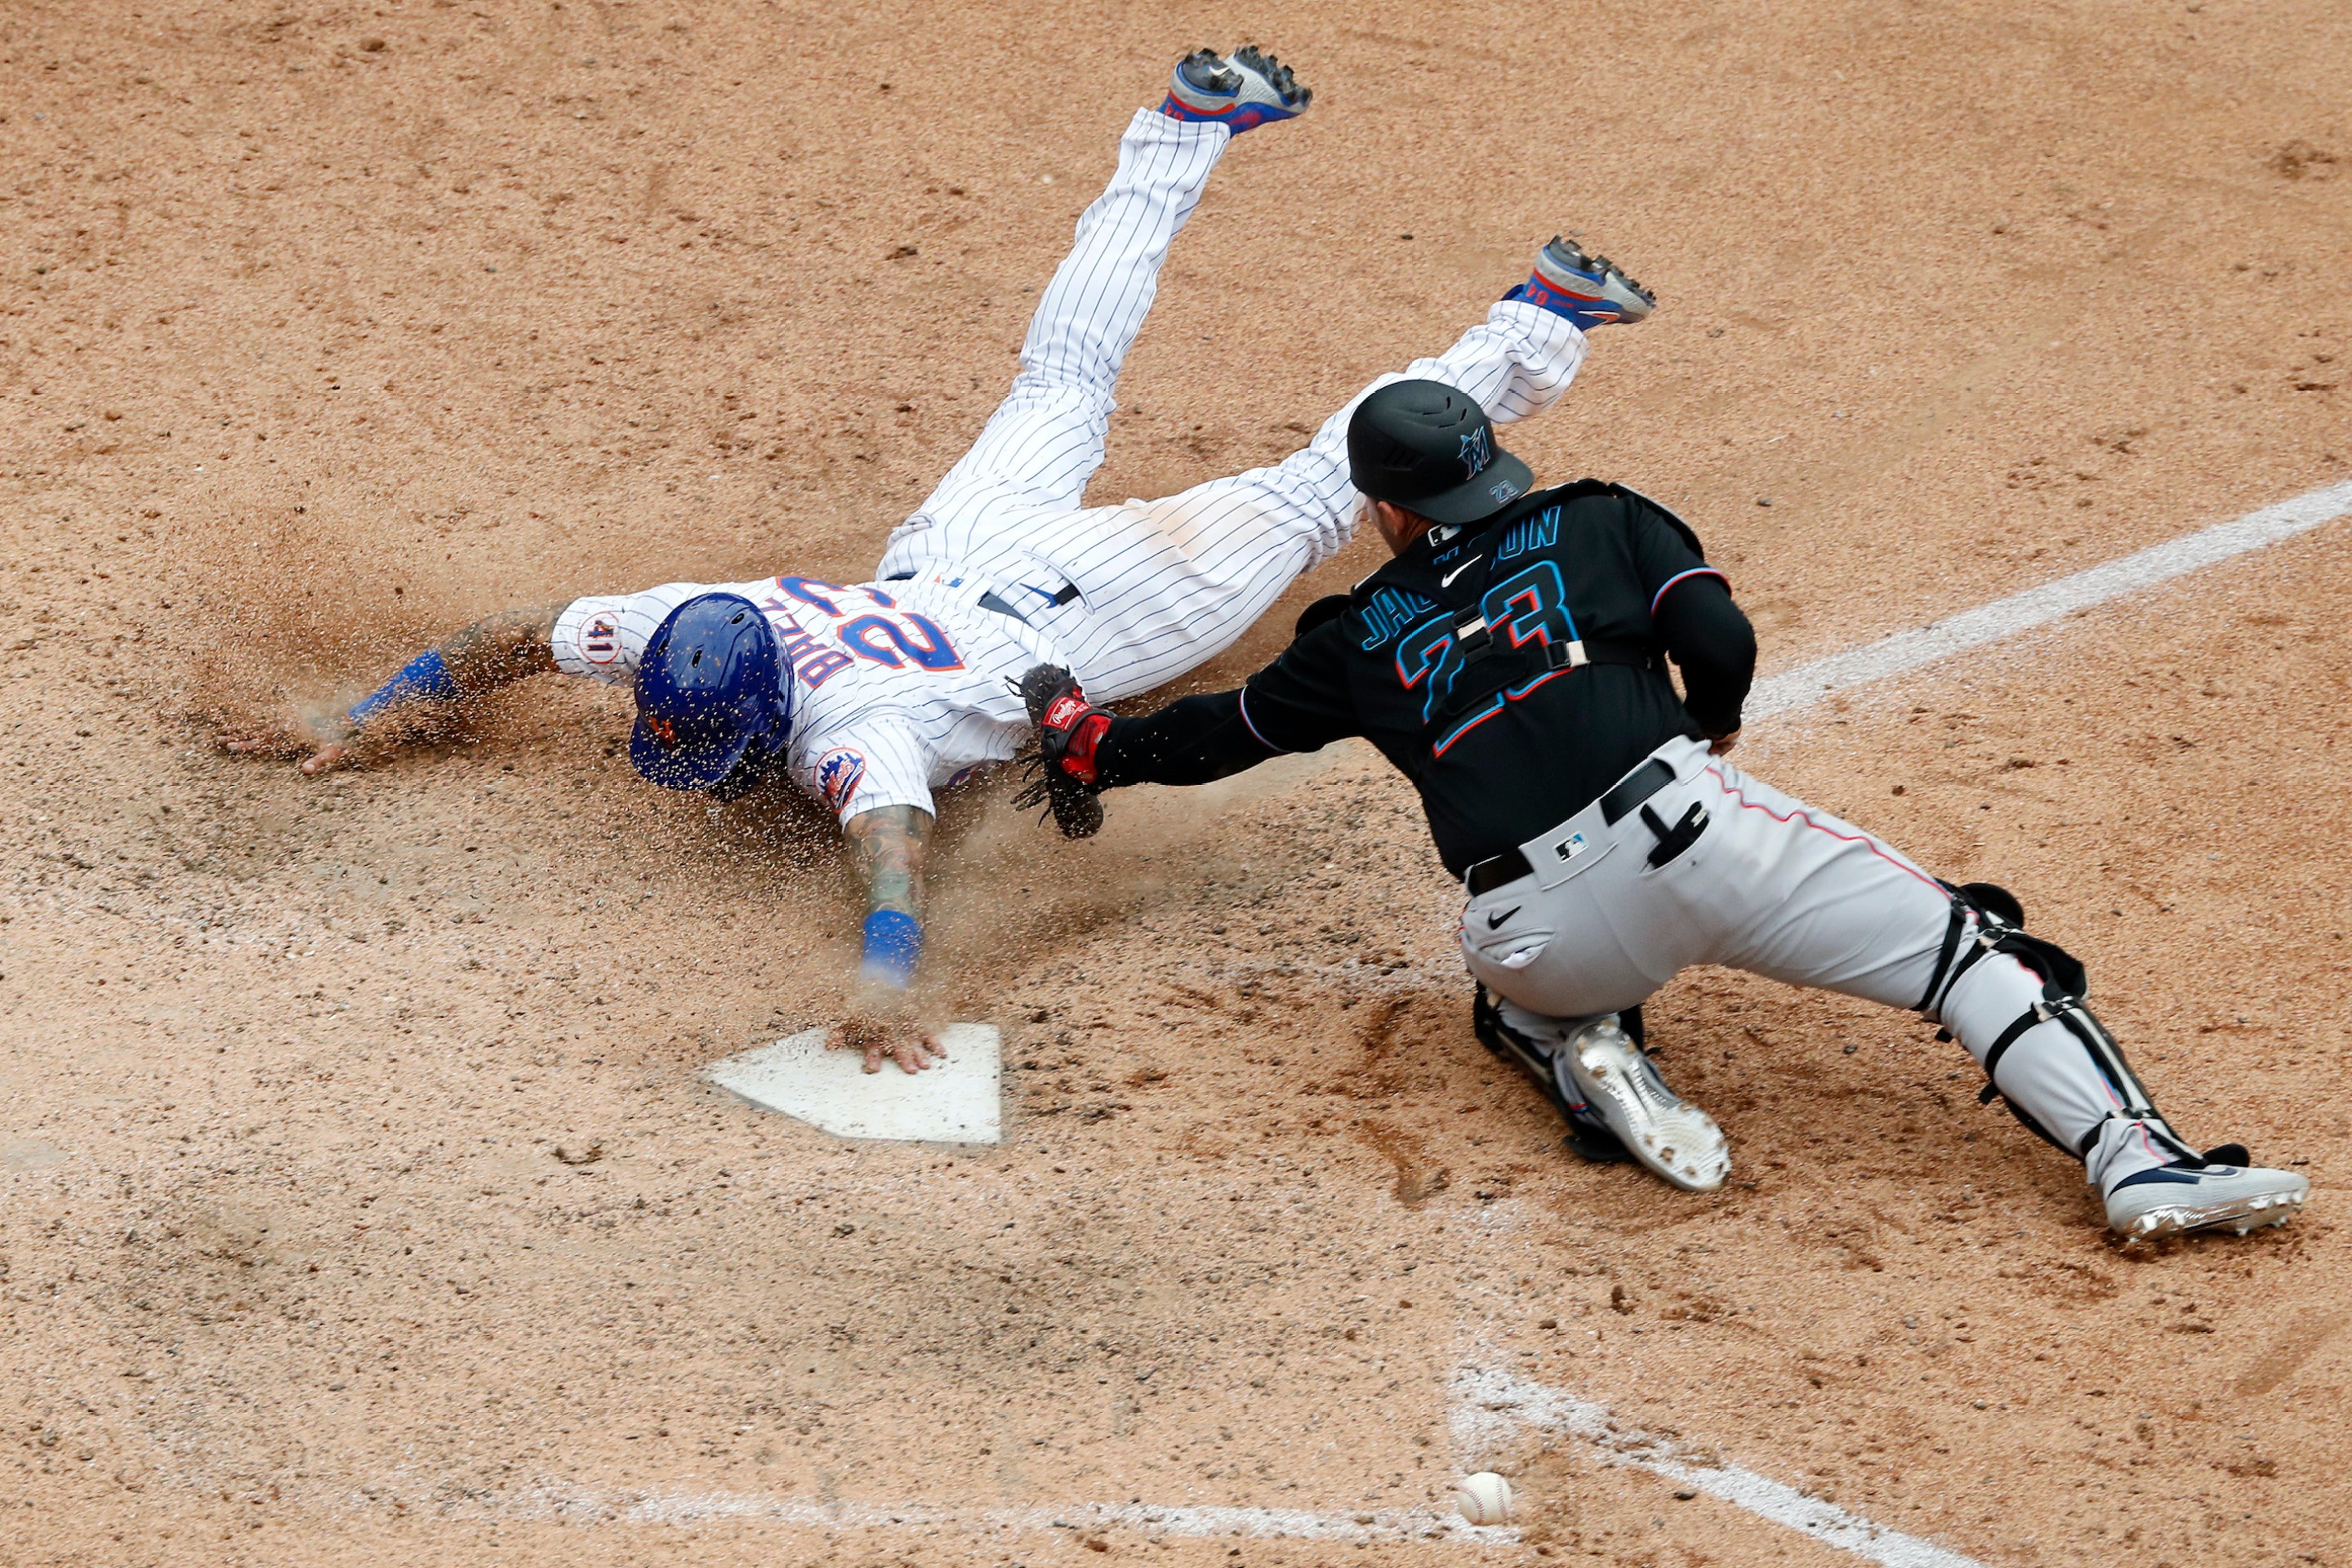 Javier Baez #23 of the New York Mets slides home with the game winning run in the ninth inning against Alex Jackson #23 of the Miami Marlins at Citi Field on August 31, 2021 in New York City.